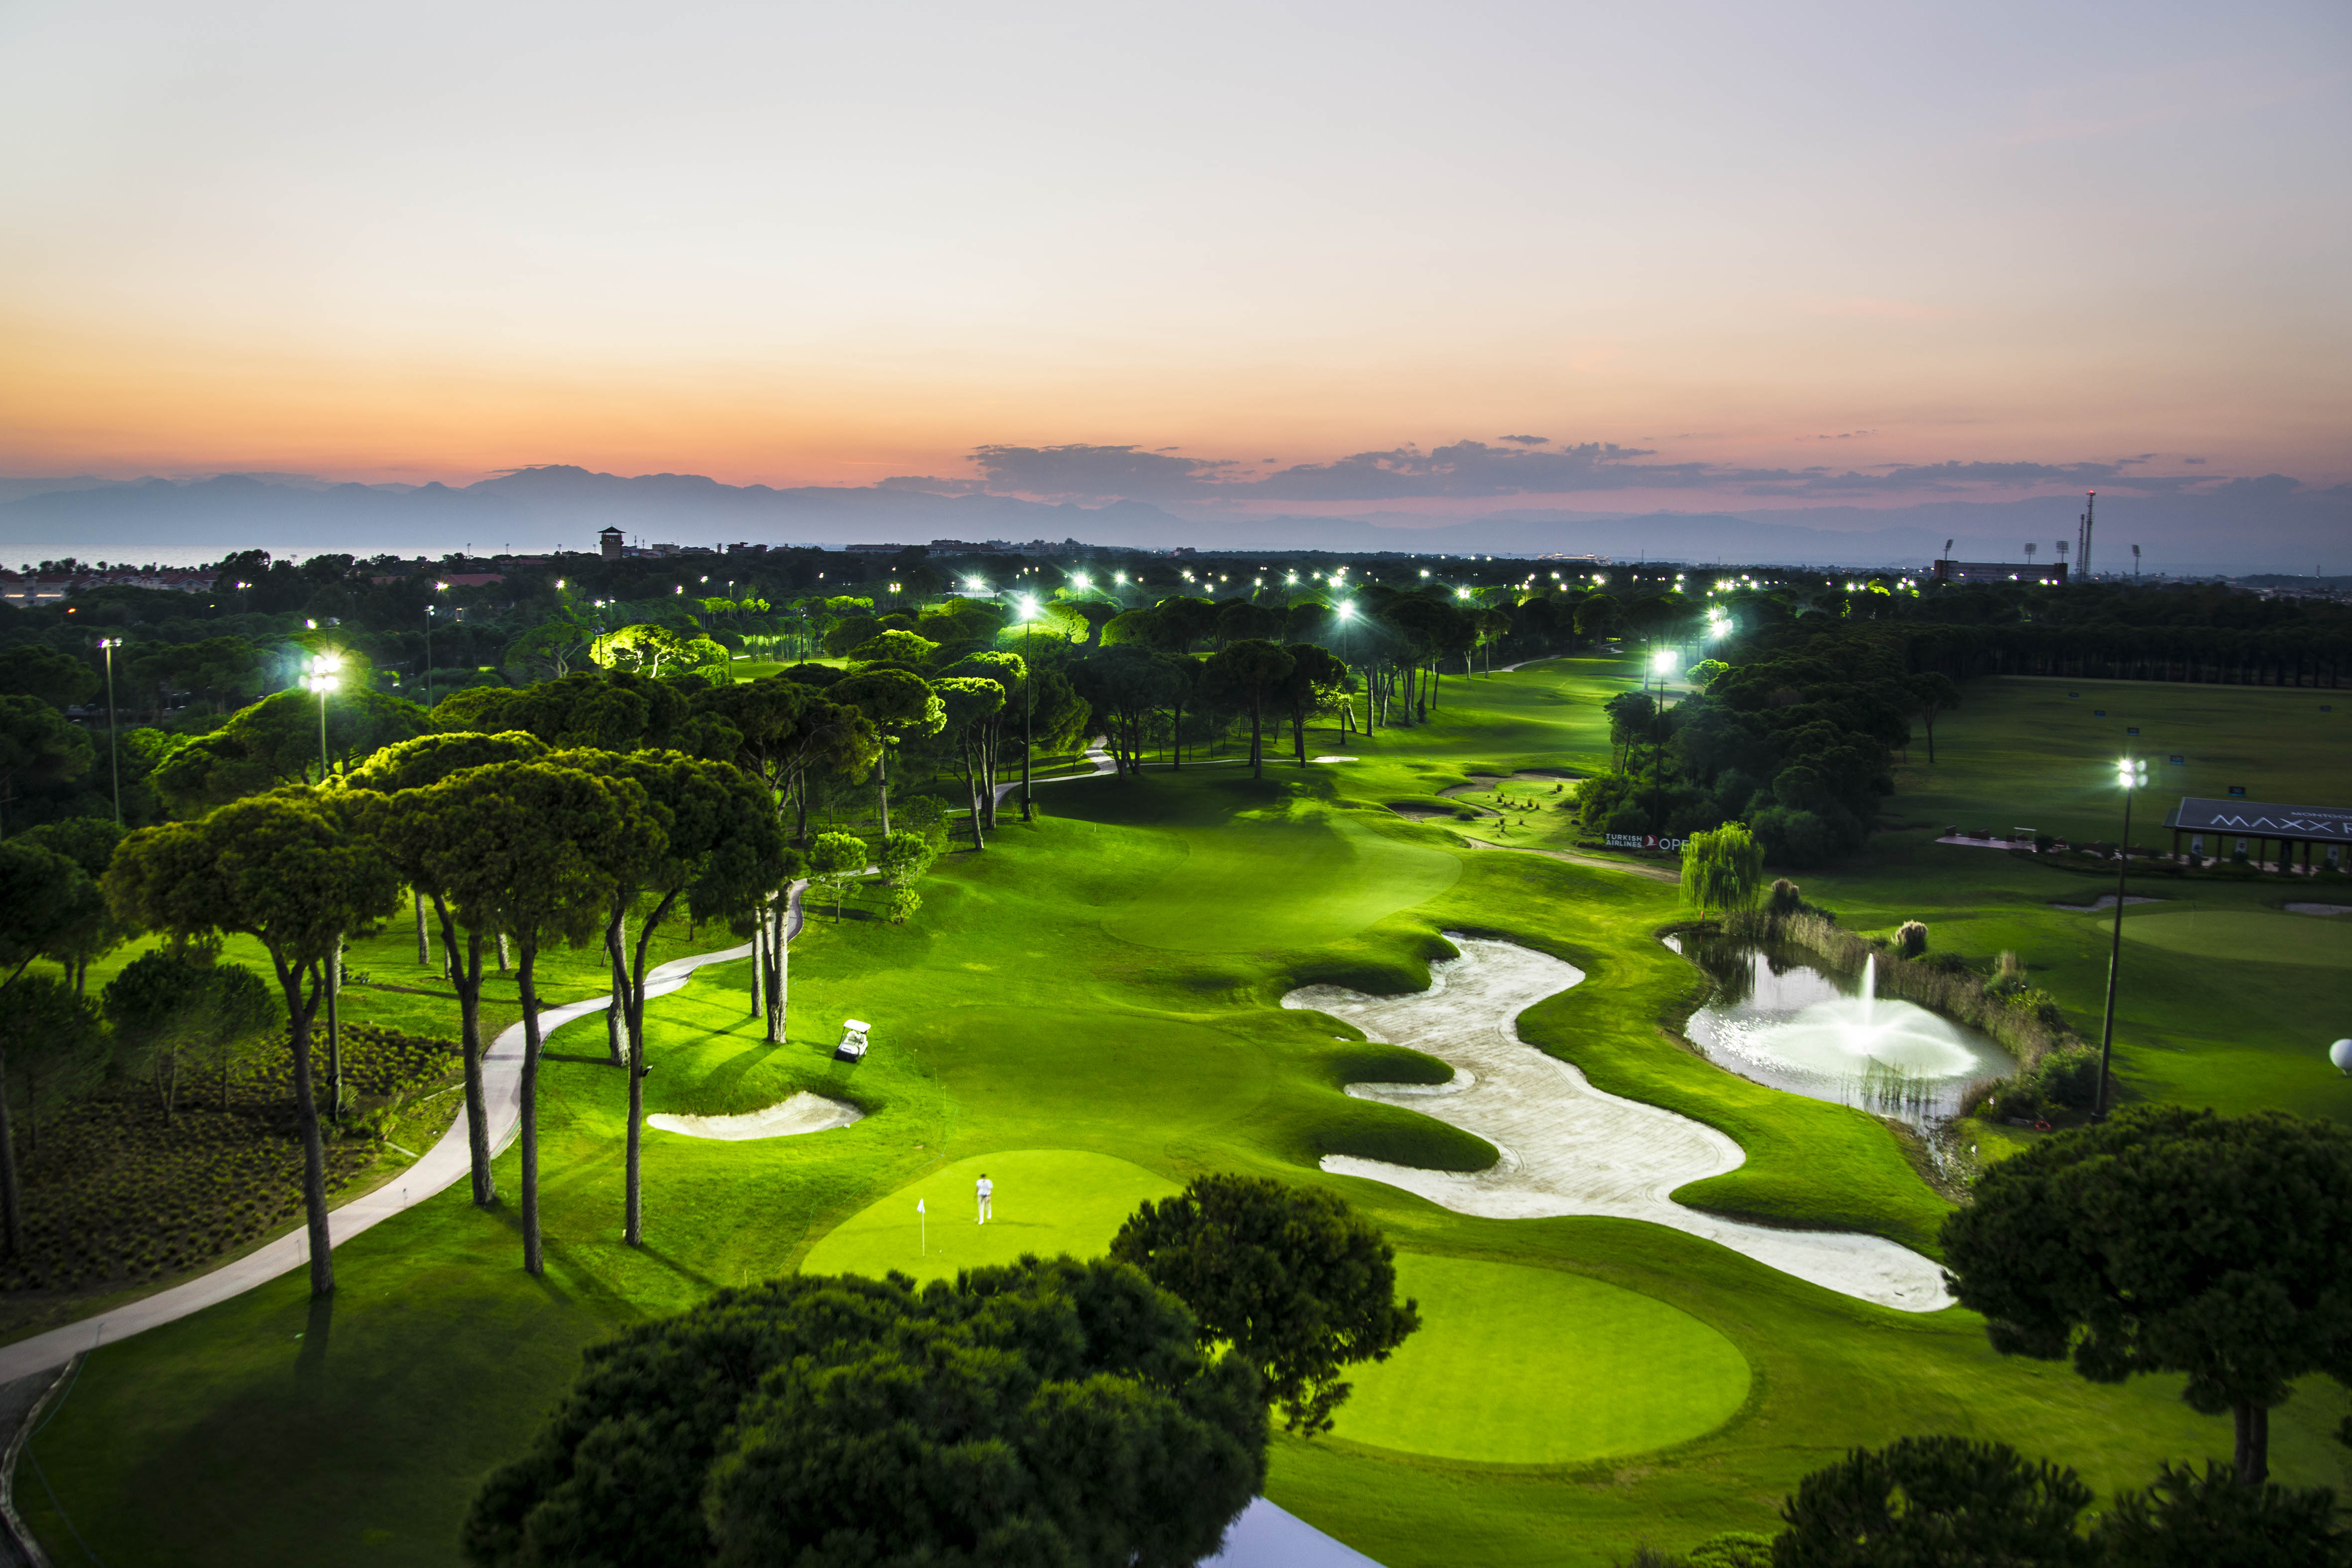 Round the clock worldfamous golf course tees off night 